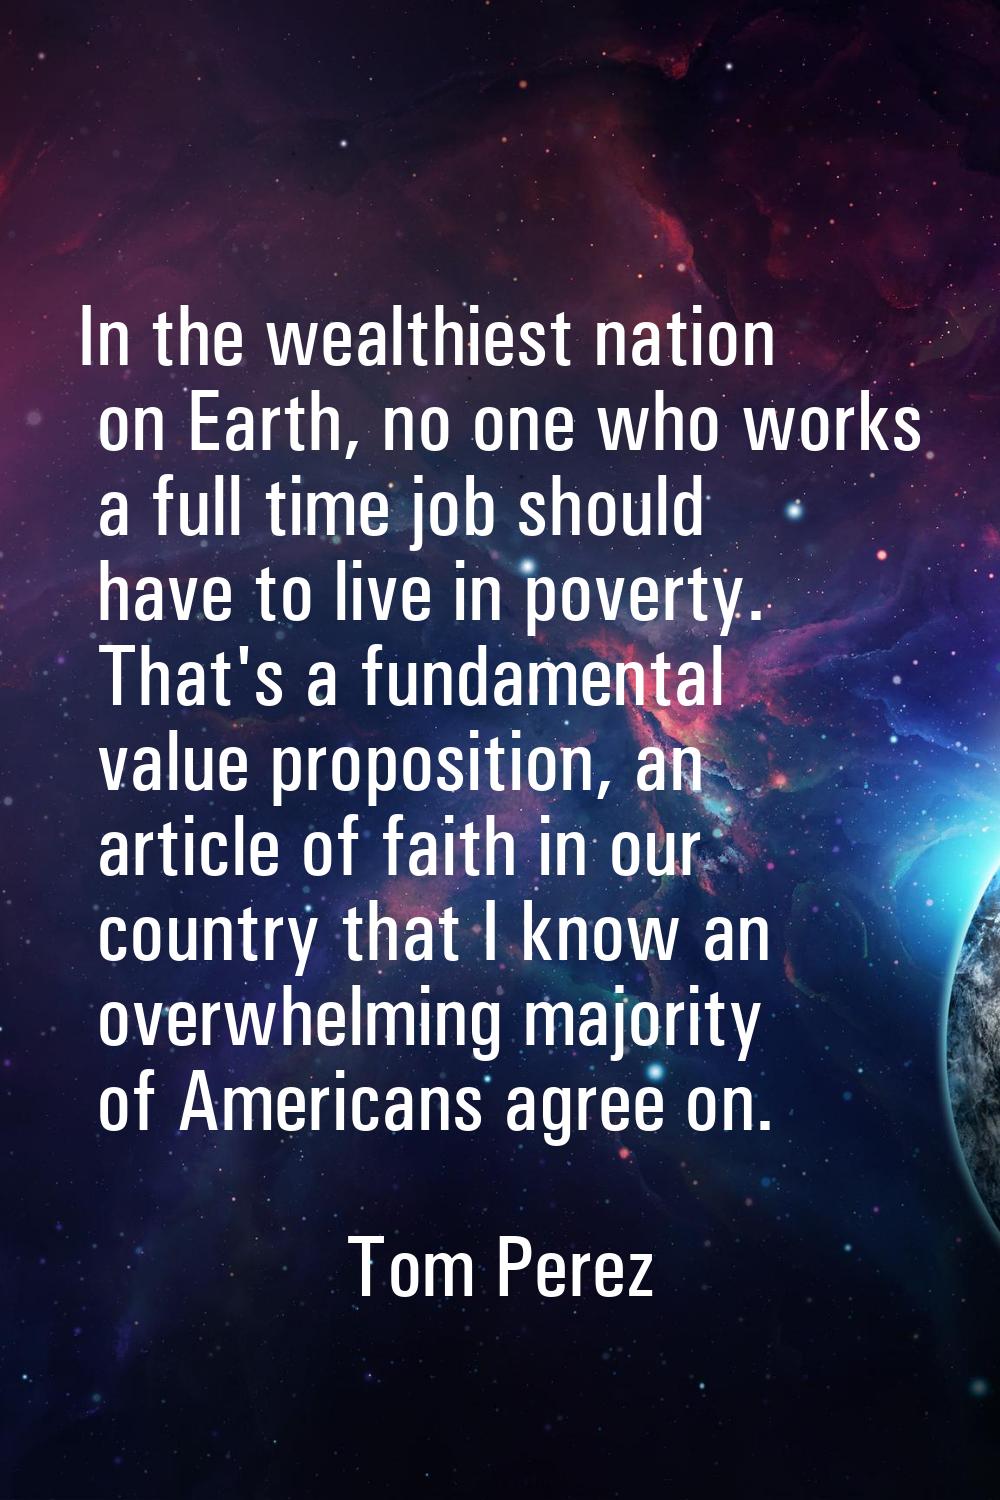 In the wealthiest nation on Earth, no one who works a full time job should have to live in poverty.